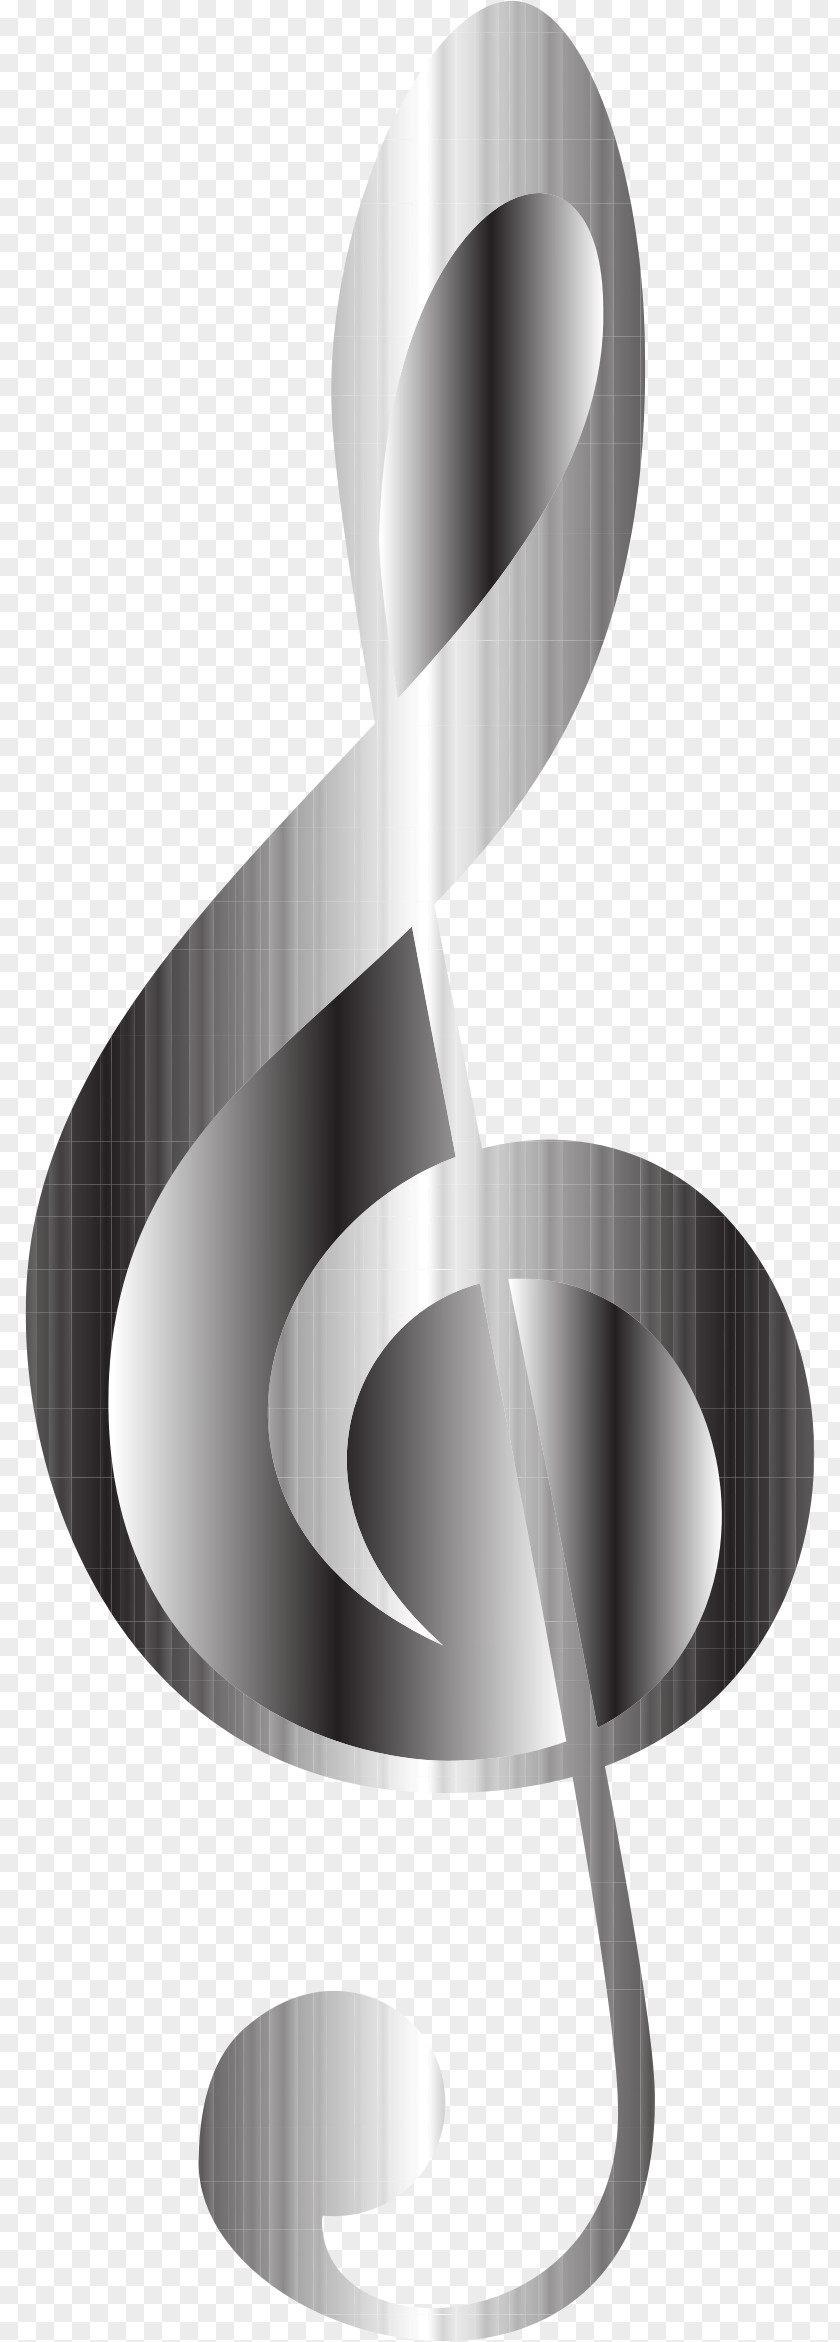 Monochrome Photography Black And White Clef Clip Art PNG